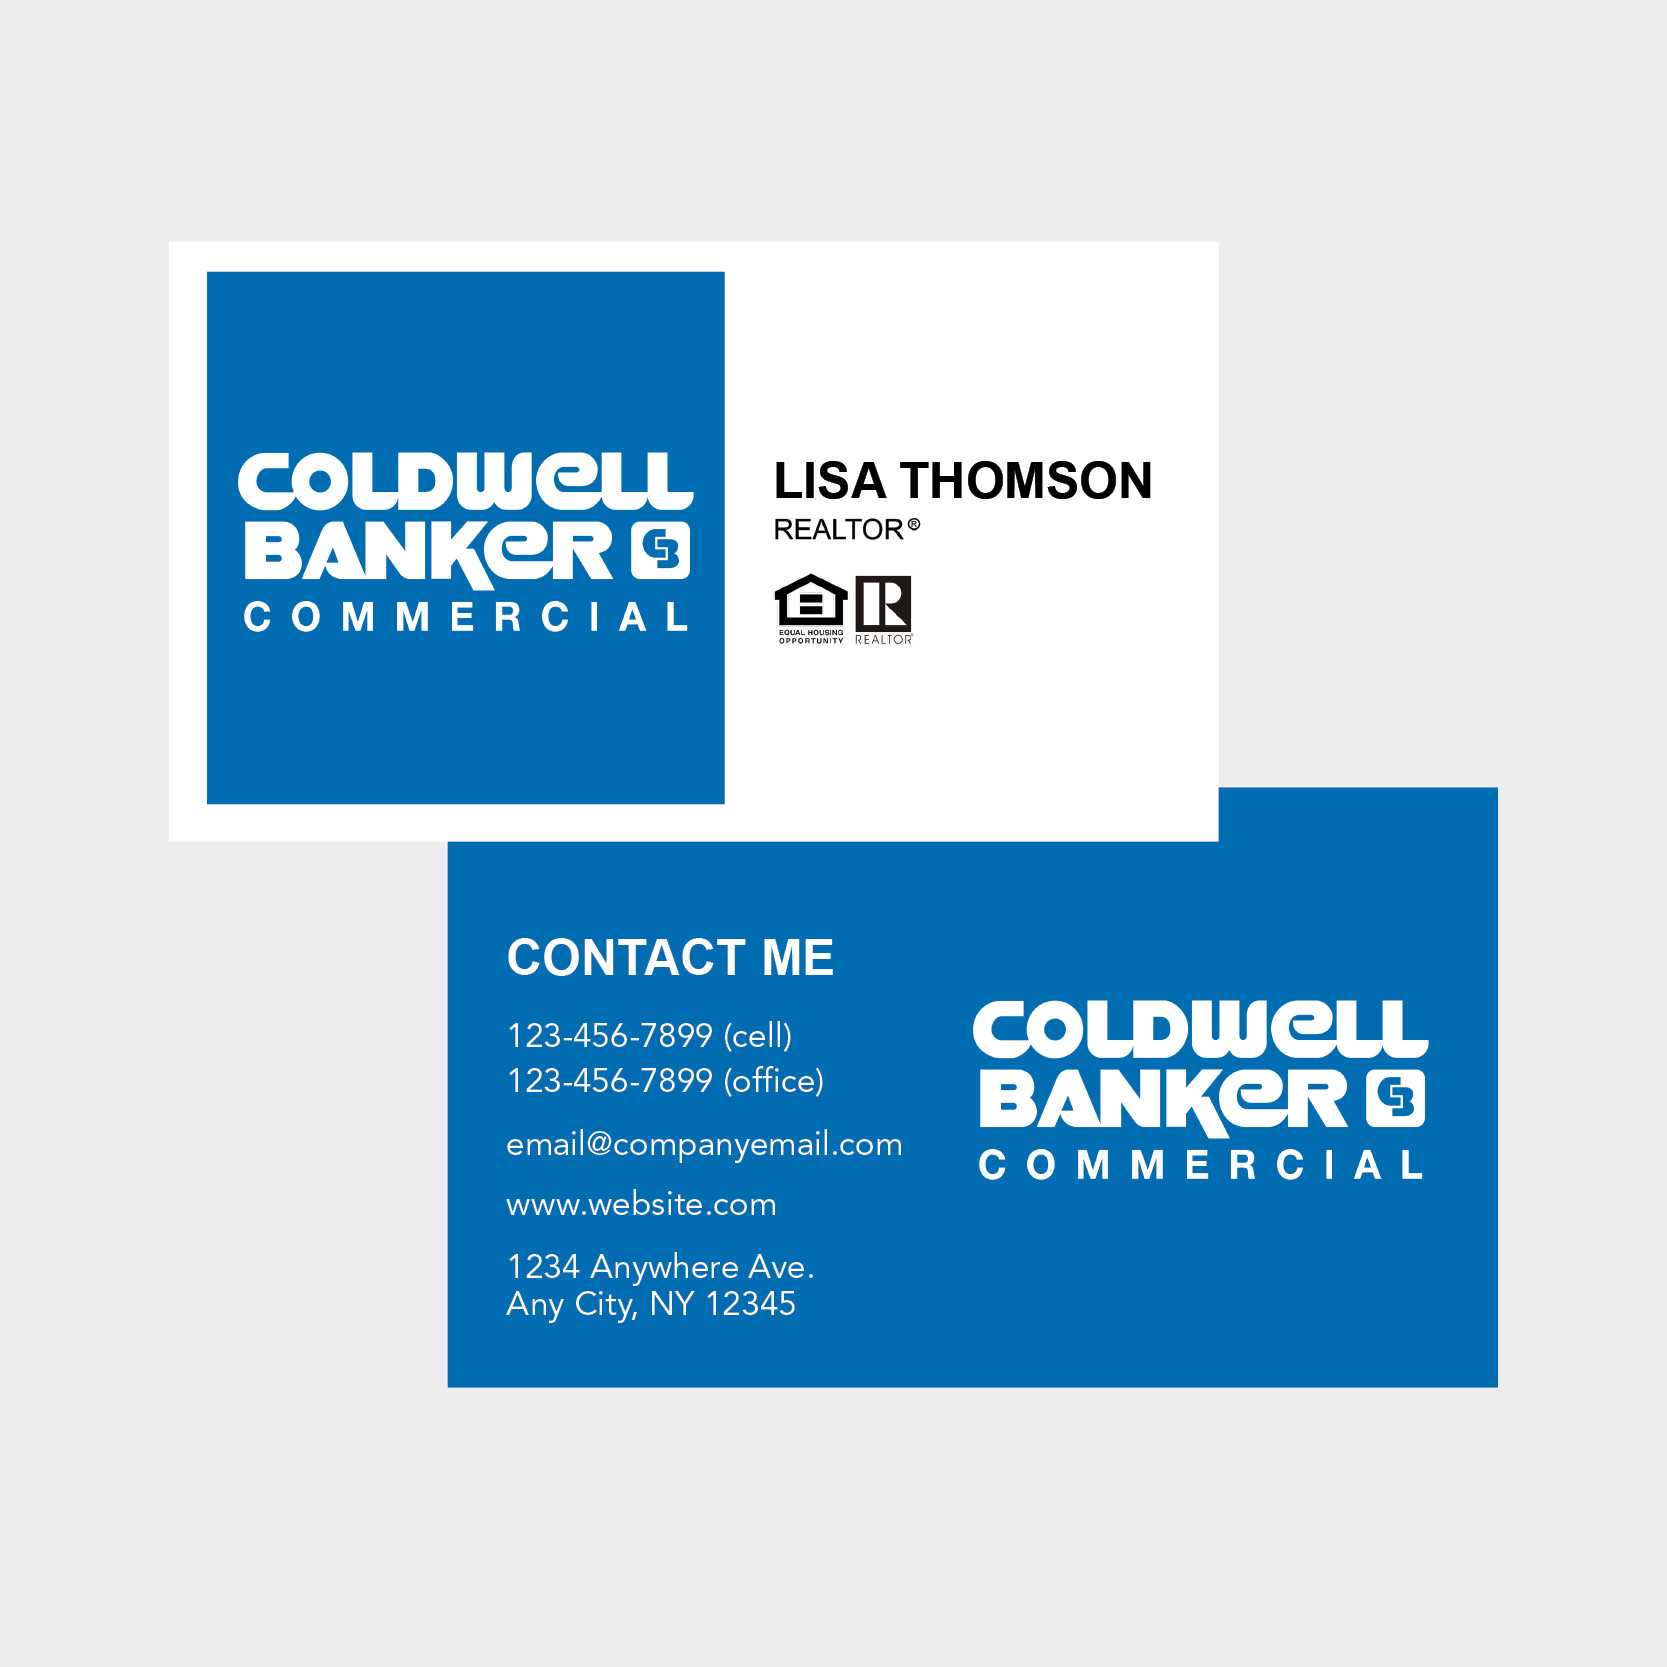 Coldwell Banker Business Card With Regard To Coldwell Banker Business Card Template